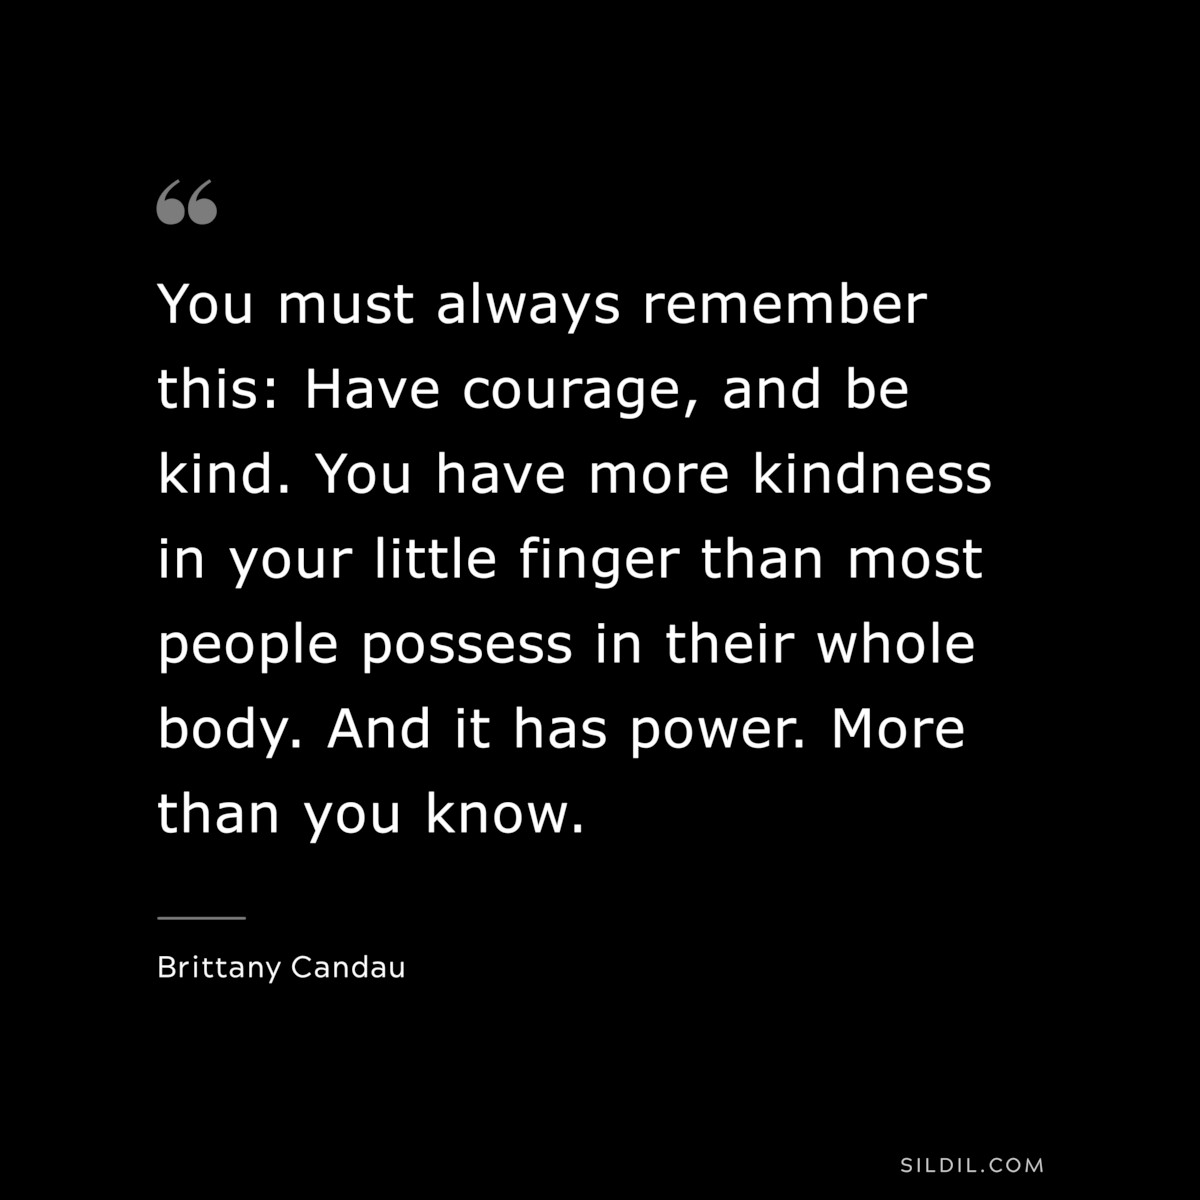 You must always remember this: Have courage, and be kind. You have more kindness in your little finger than most people possess in their whole body. And it has power. More than you know. ― Brittany Candau